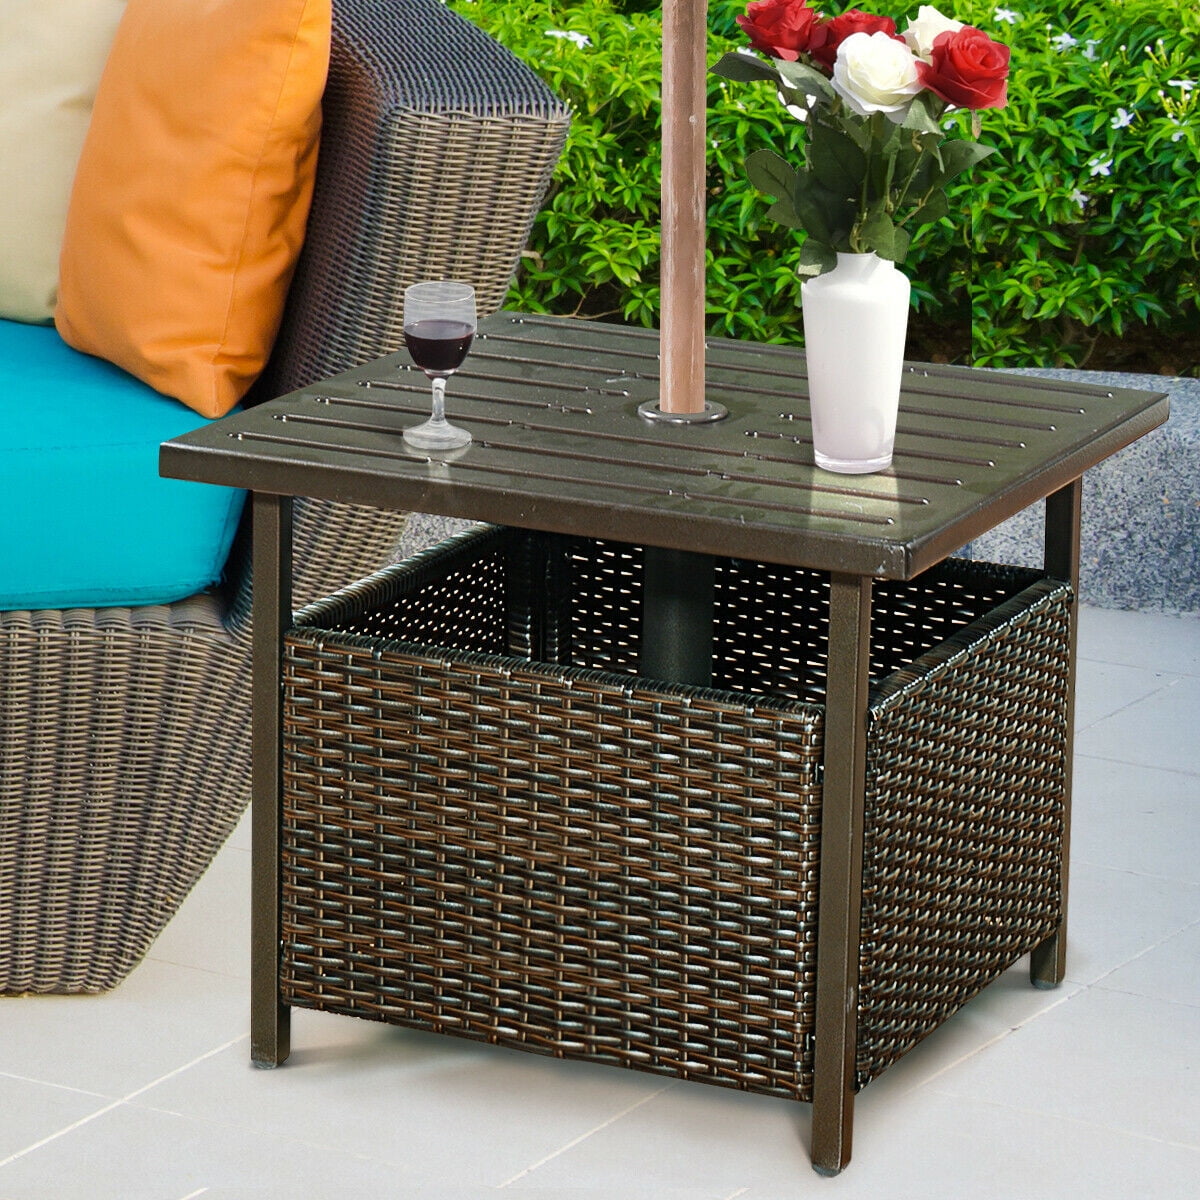 Synthetic Rattan Coffee Table Patio Table Outdoor Furniture Side Table Dining Table for Garden Pool Backyard Black 